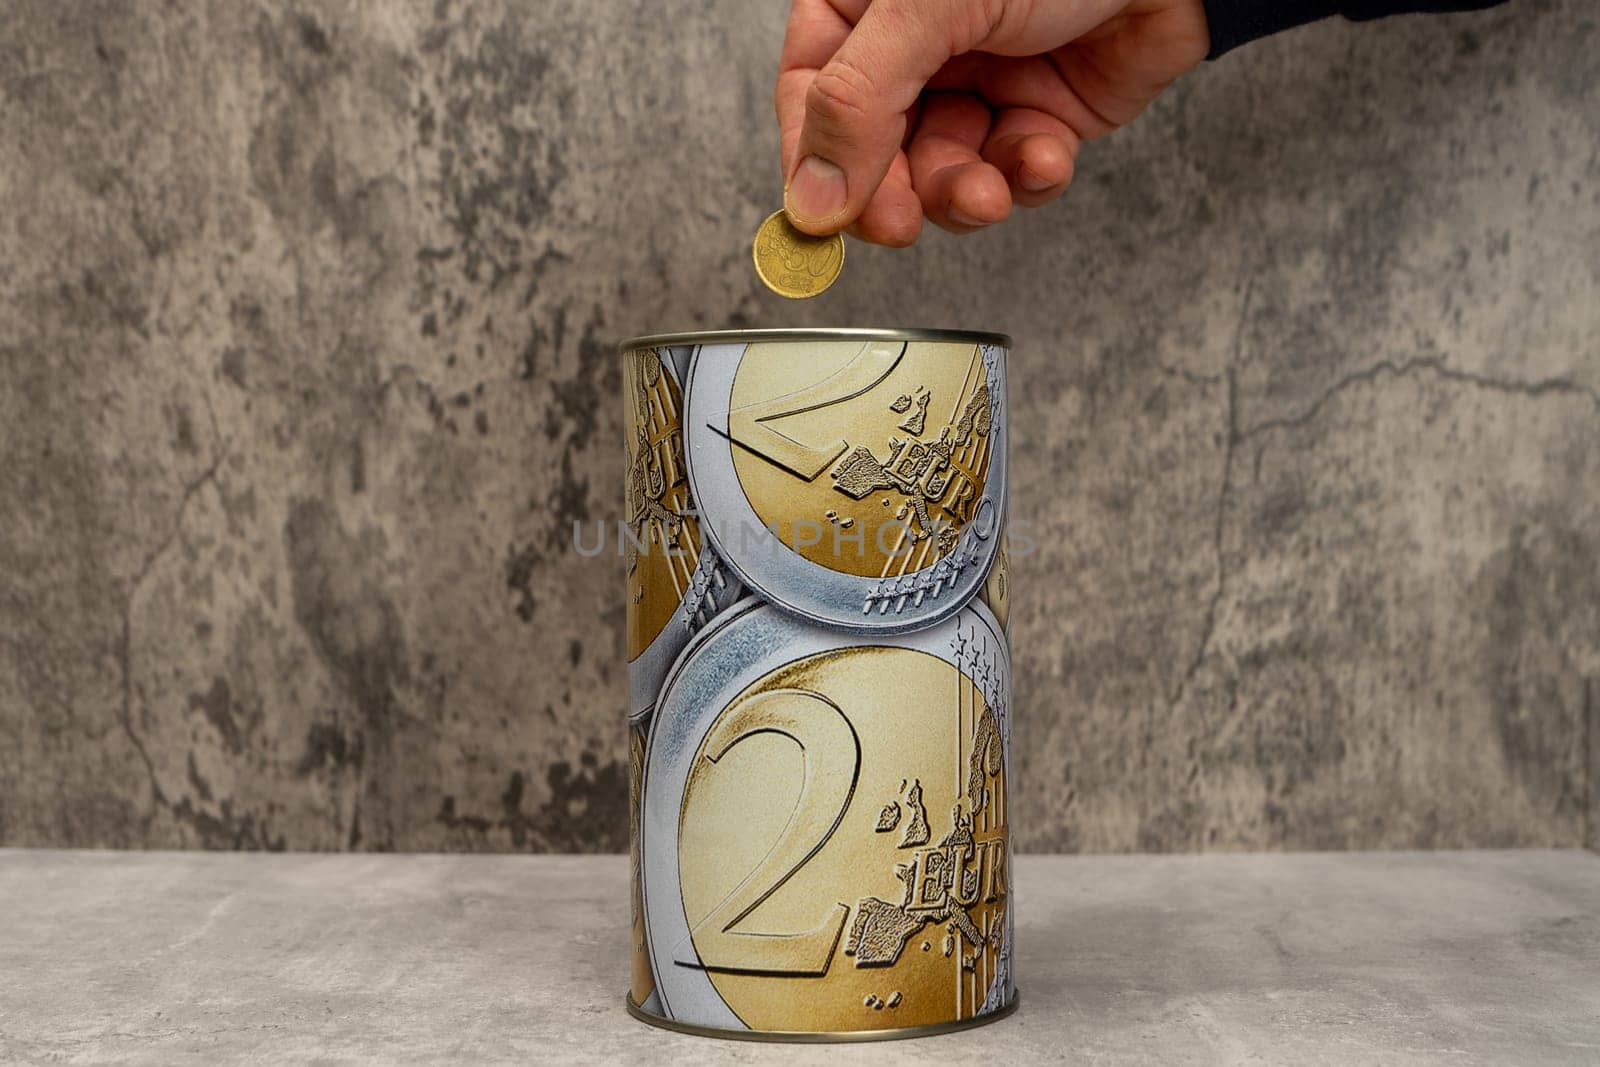 Man's hand putting a 50 cent coin into a metal piggy bank with euro symbols to save money. On a gray background. Keep bills in a makeshift savings account